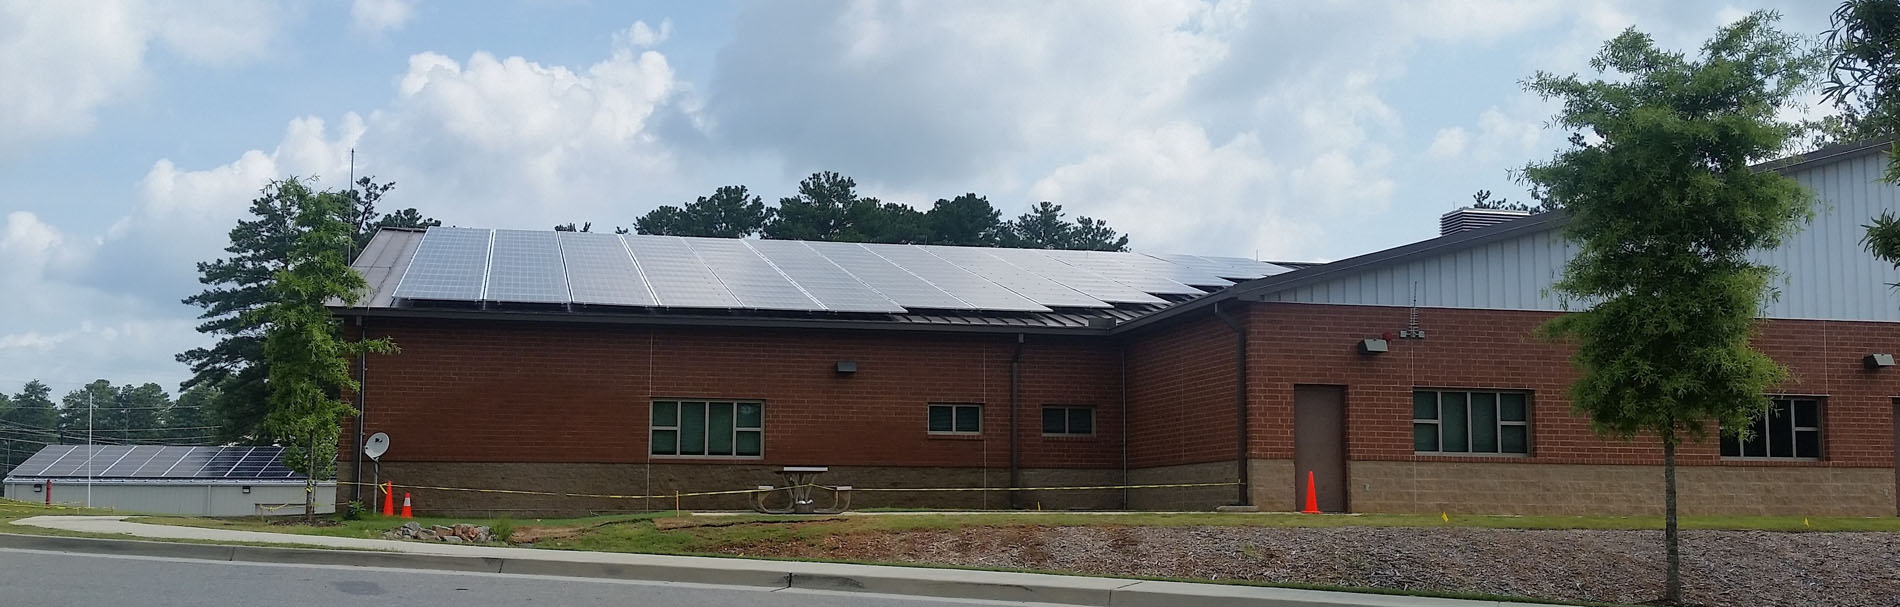 solar roof, commercial property